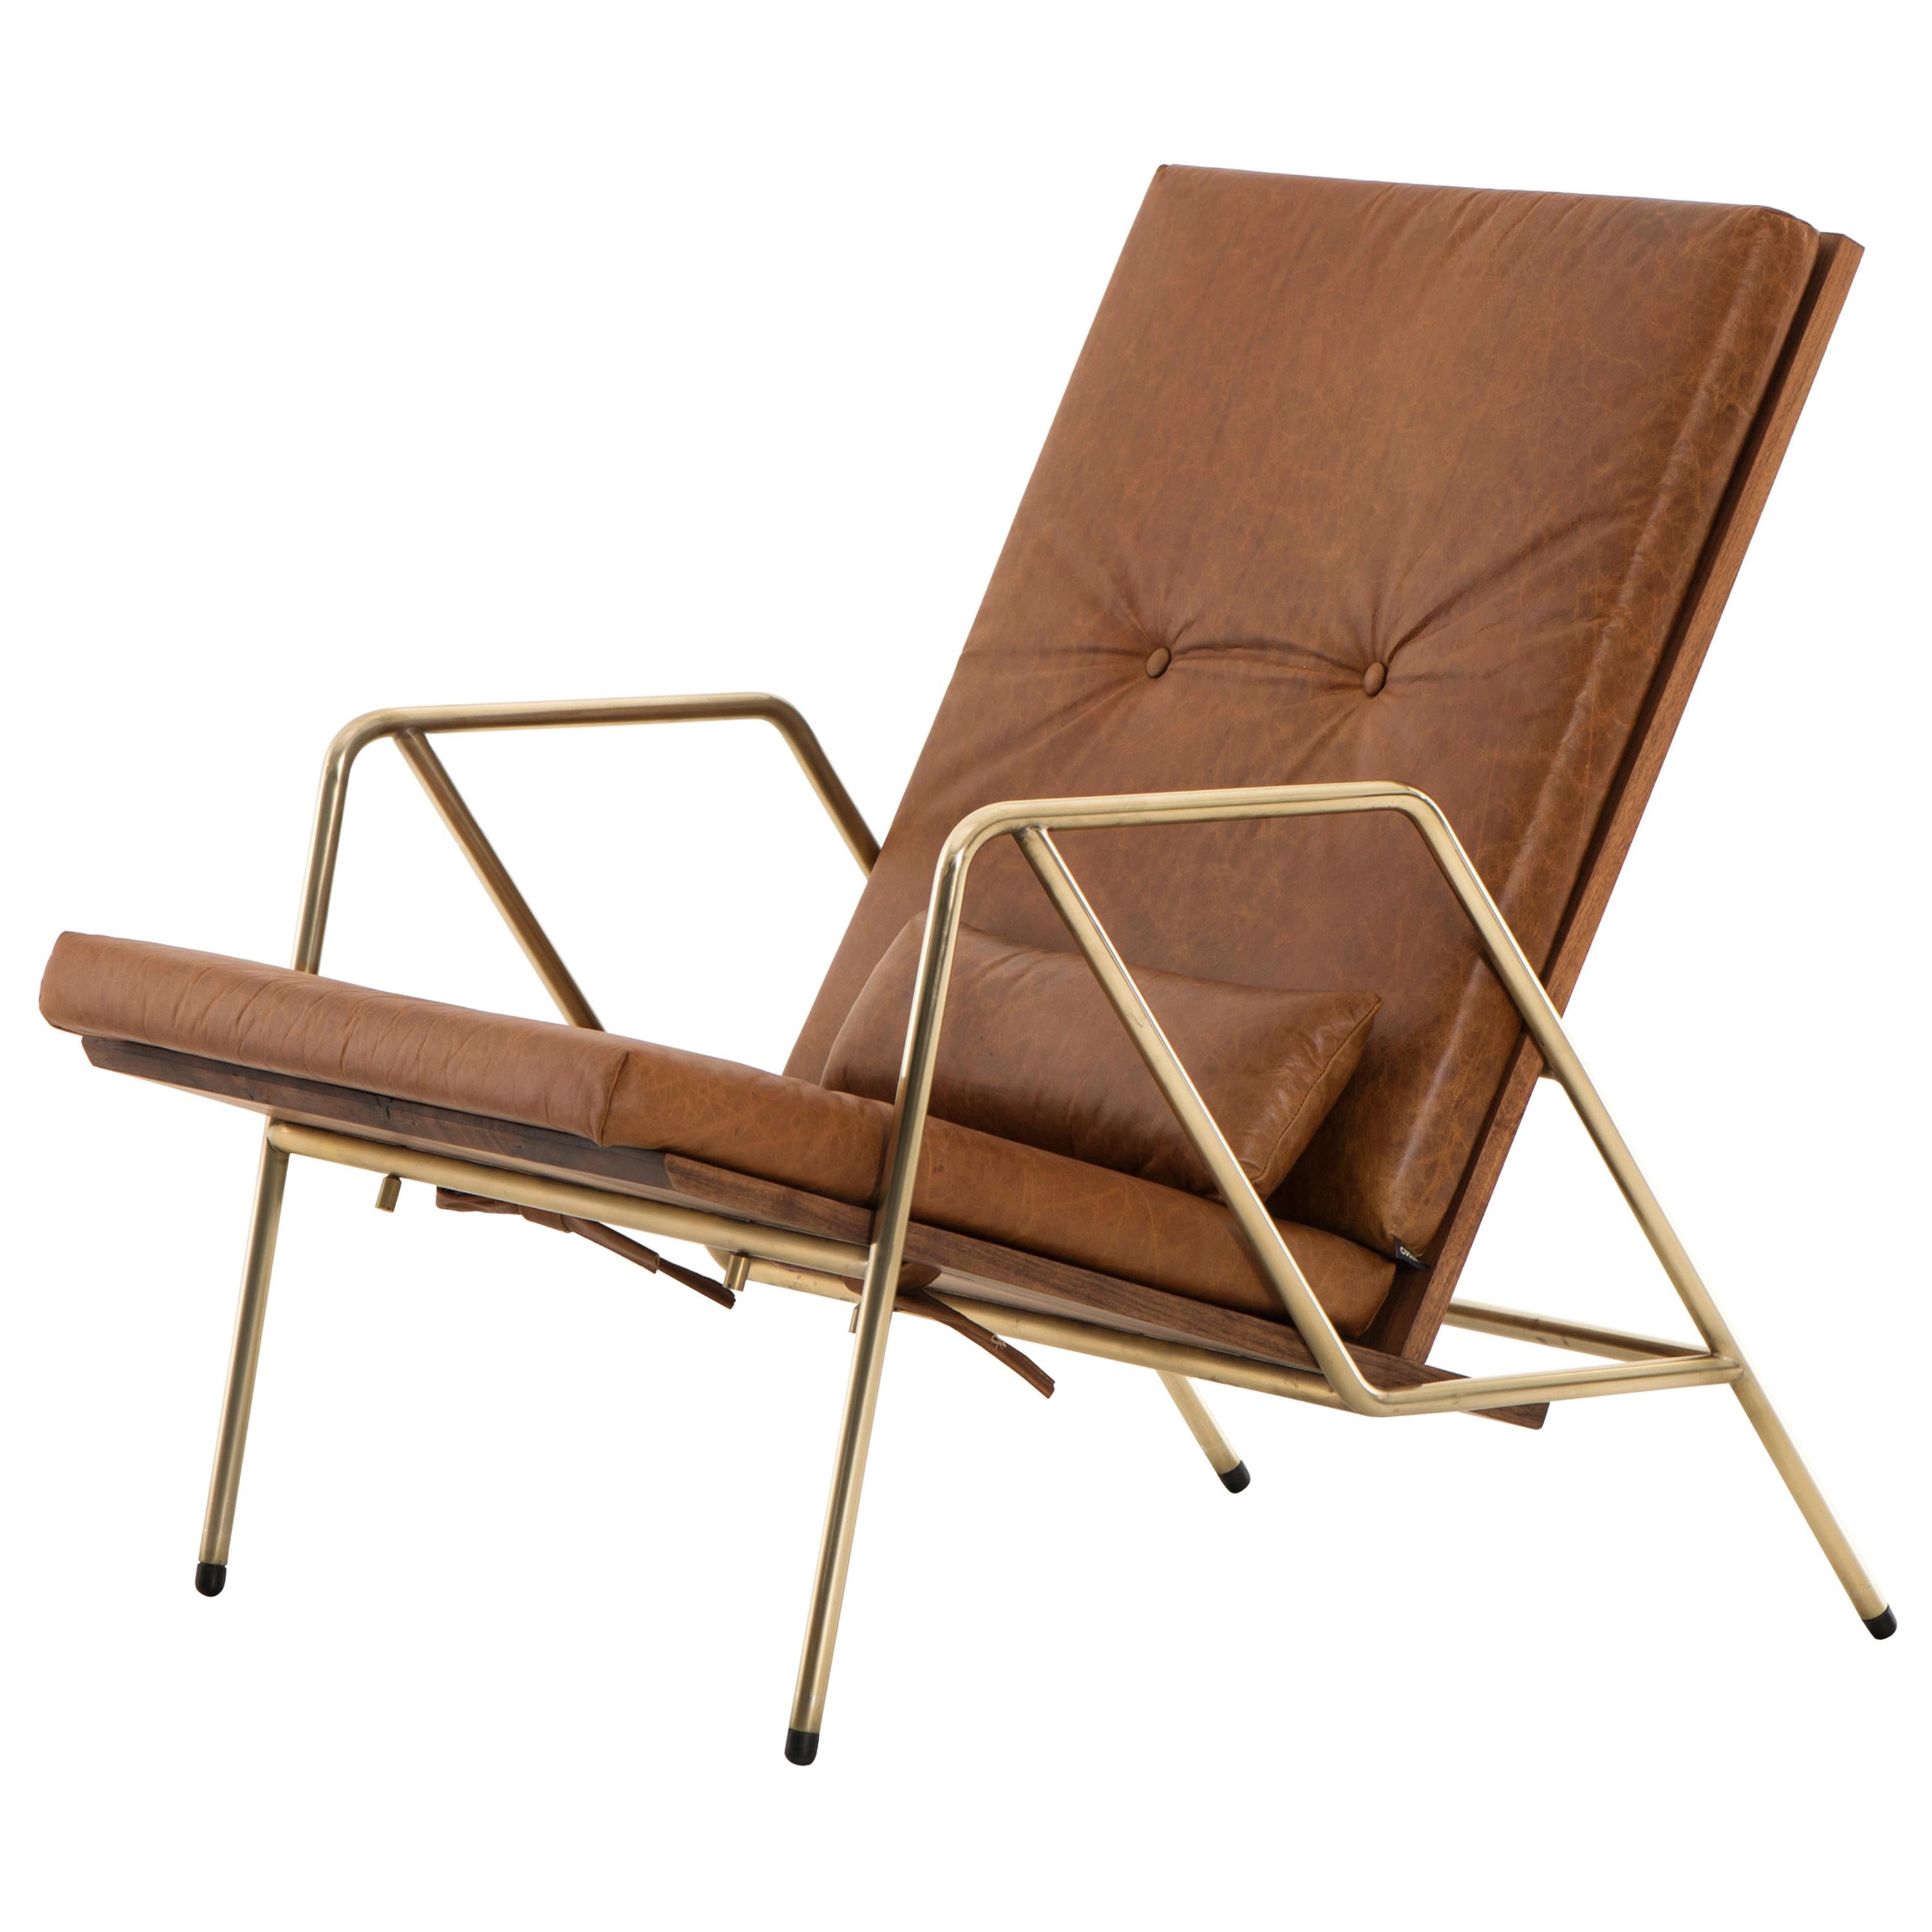 Tumbona Duna, Mexican Contemporary Lounge Chair by Emiliano Molina for Cuchara For Sale